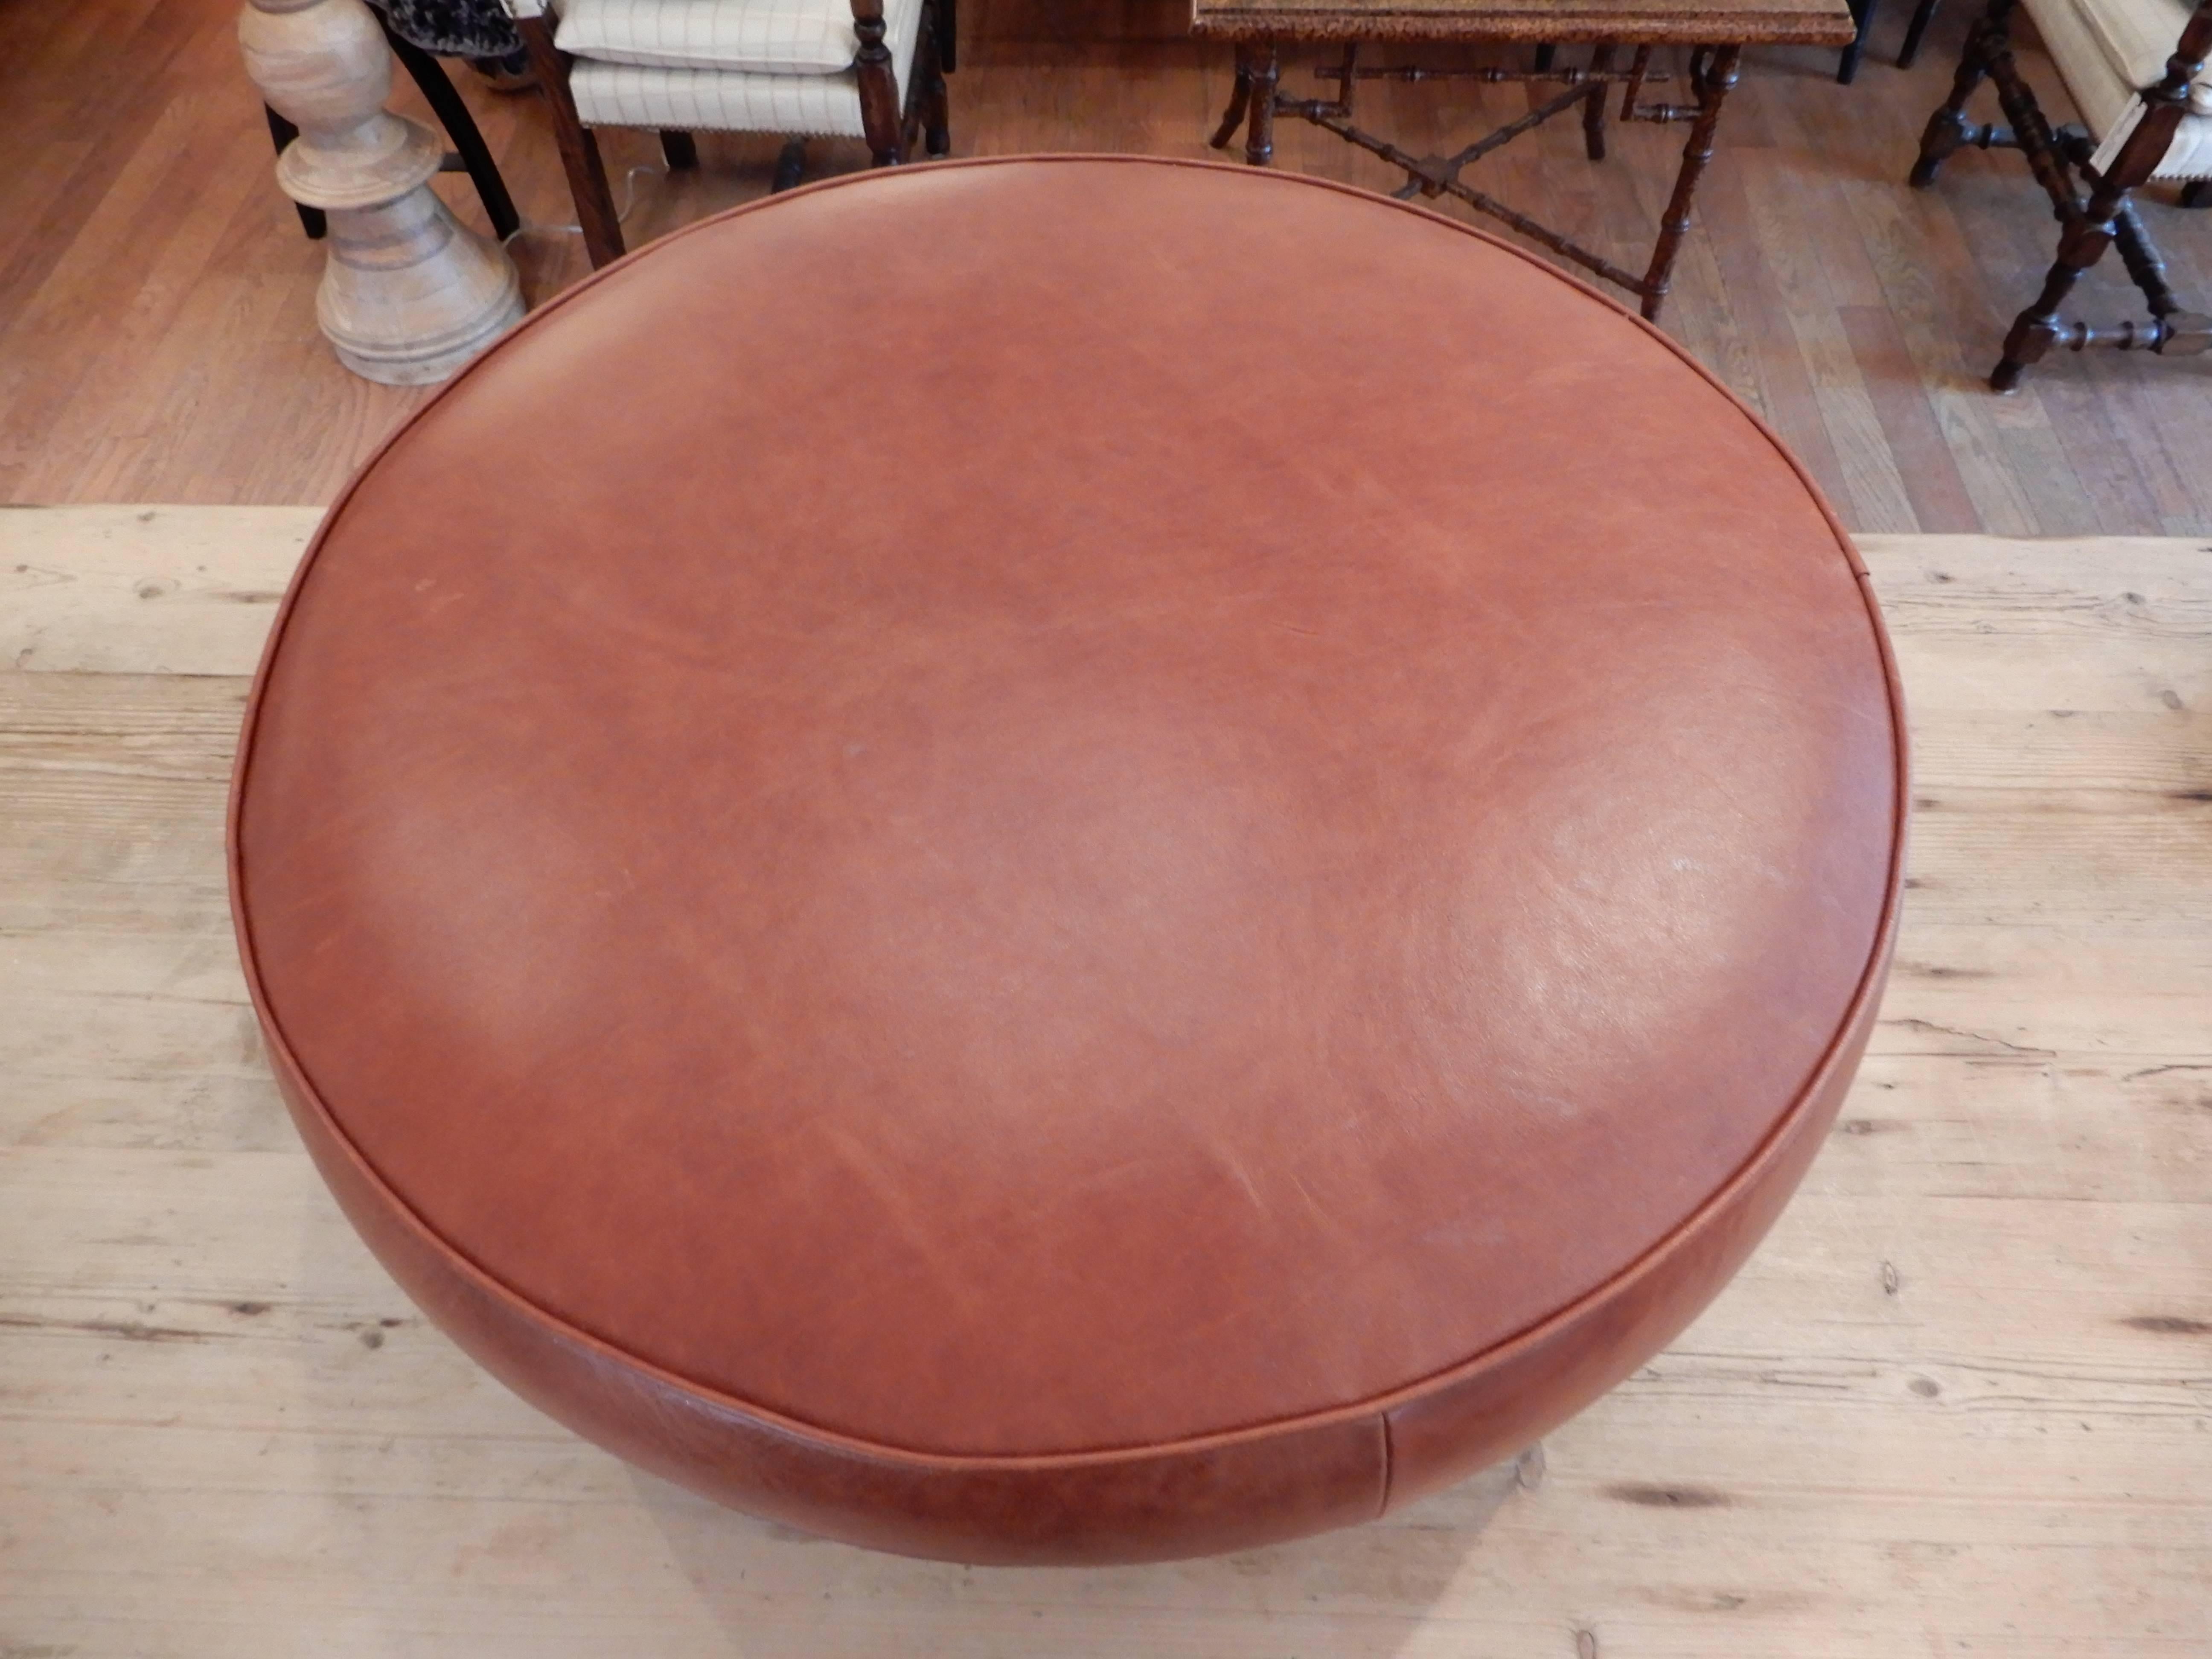 A Danish Mid Century Modern low ottoman or stool,measuring 30 inches round and 11 inches high,flat enough for a tray top.
New premium leather in a rich  cognac brown,wood legs with bronzed metal feet.